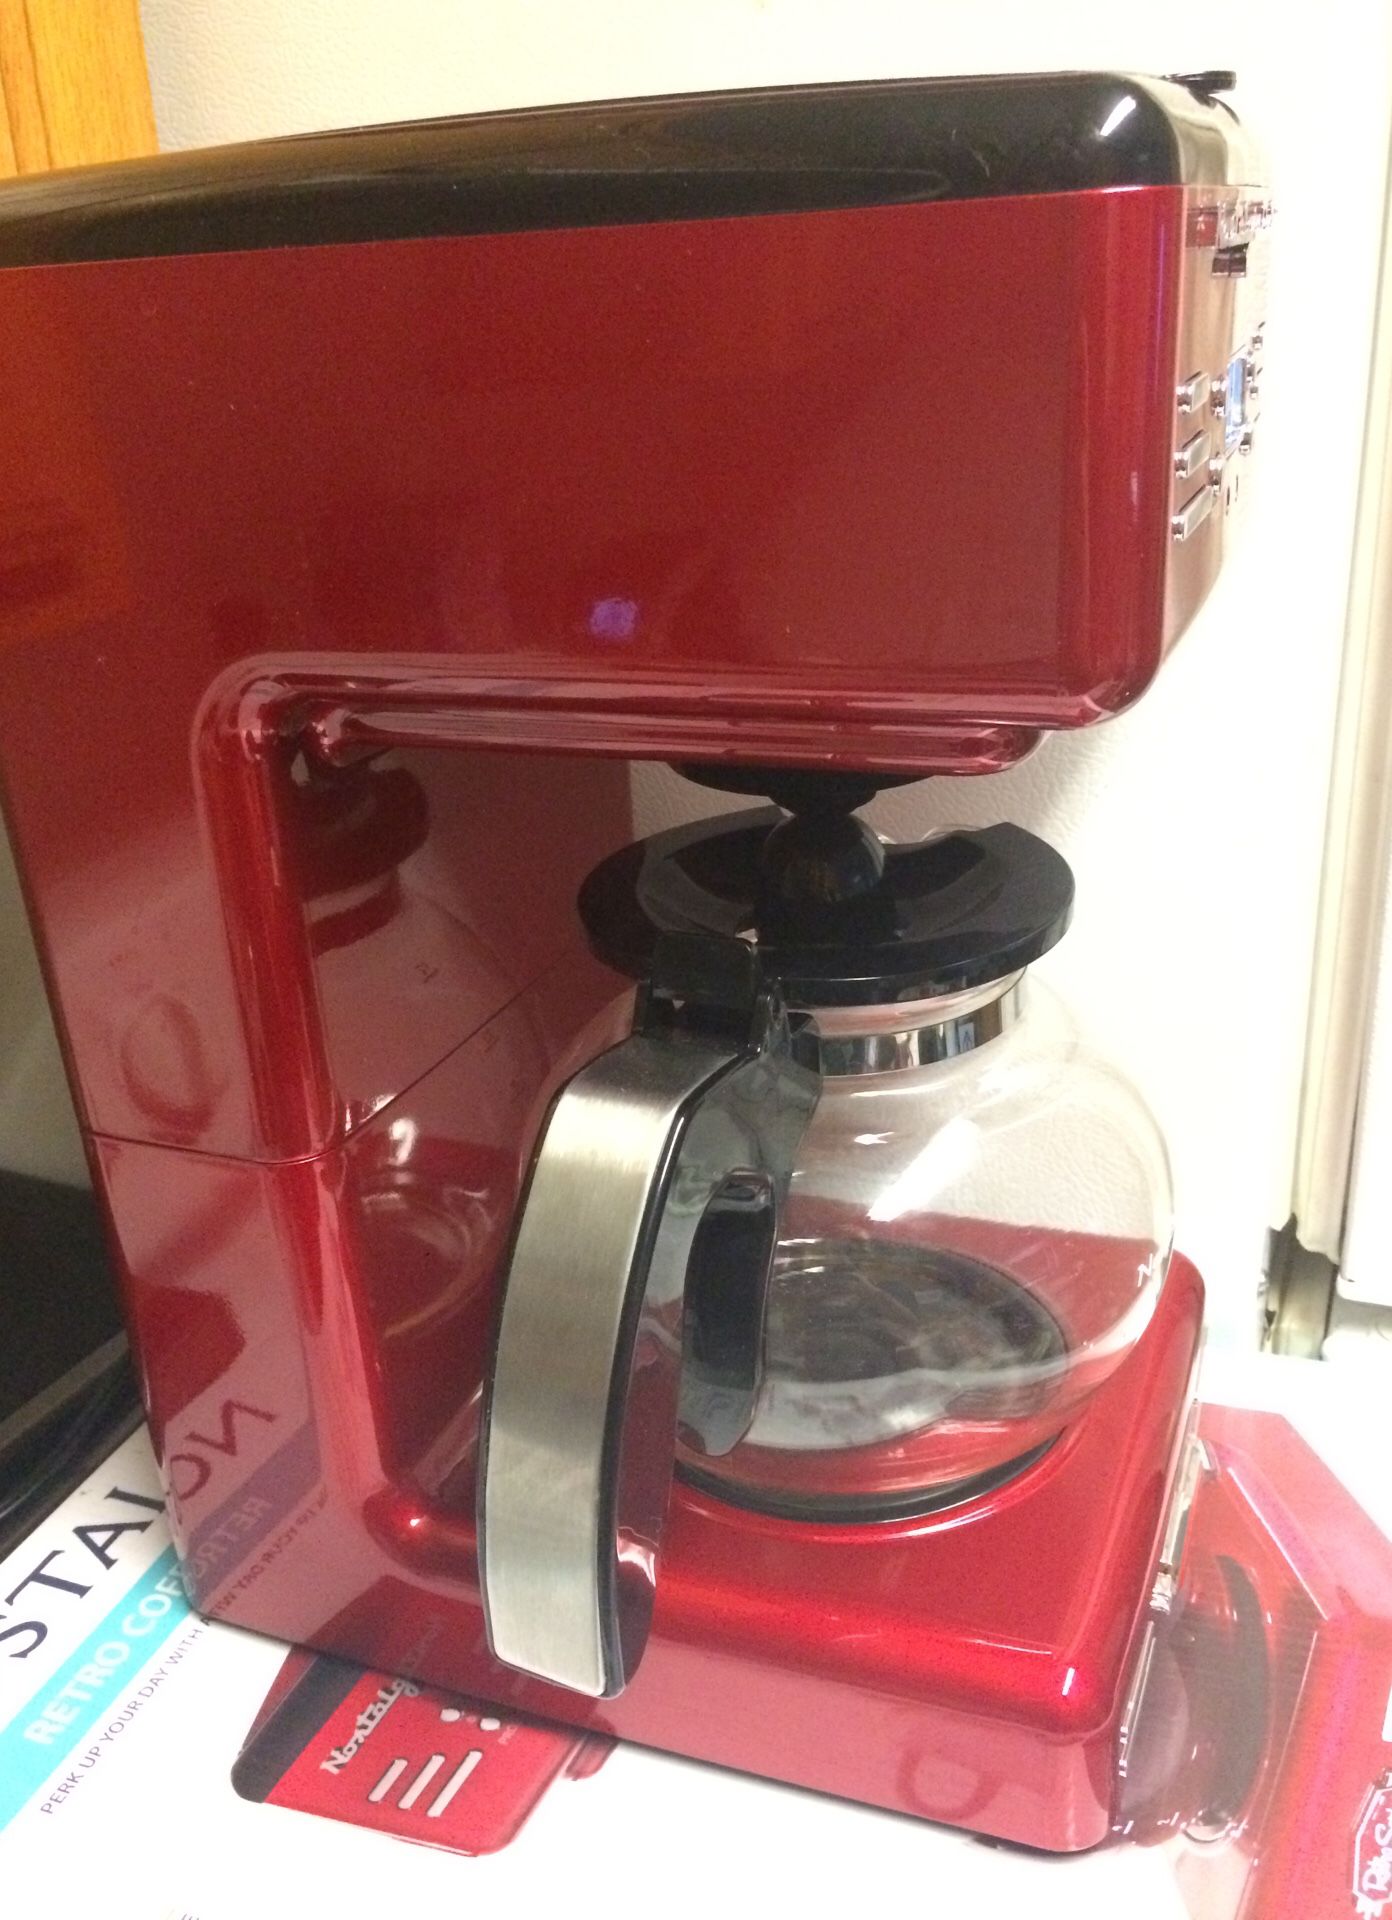 Nostalgia Retro 12-Cup Programmable Coffee Maker – Aqua. new. Not in box  ***pick up NE Salem for Sale in Salem, OR - OfferUp